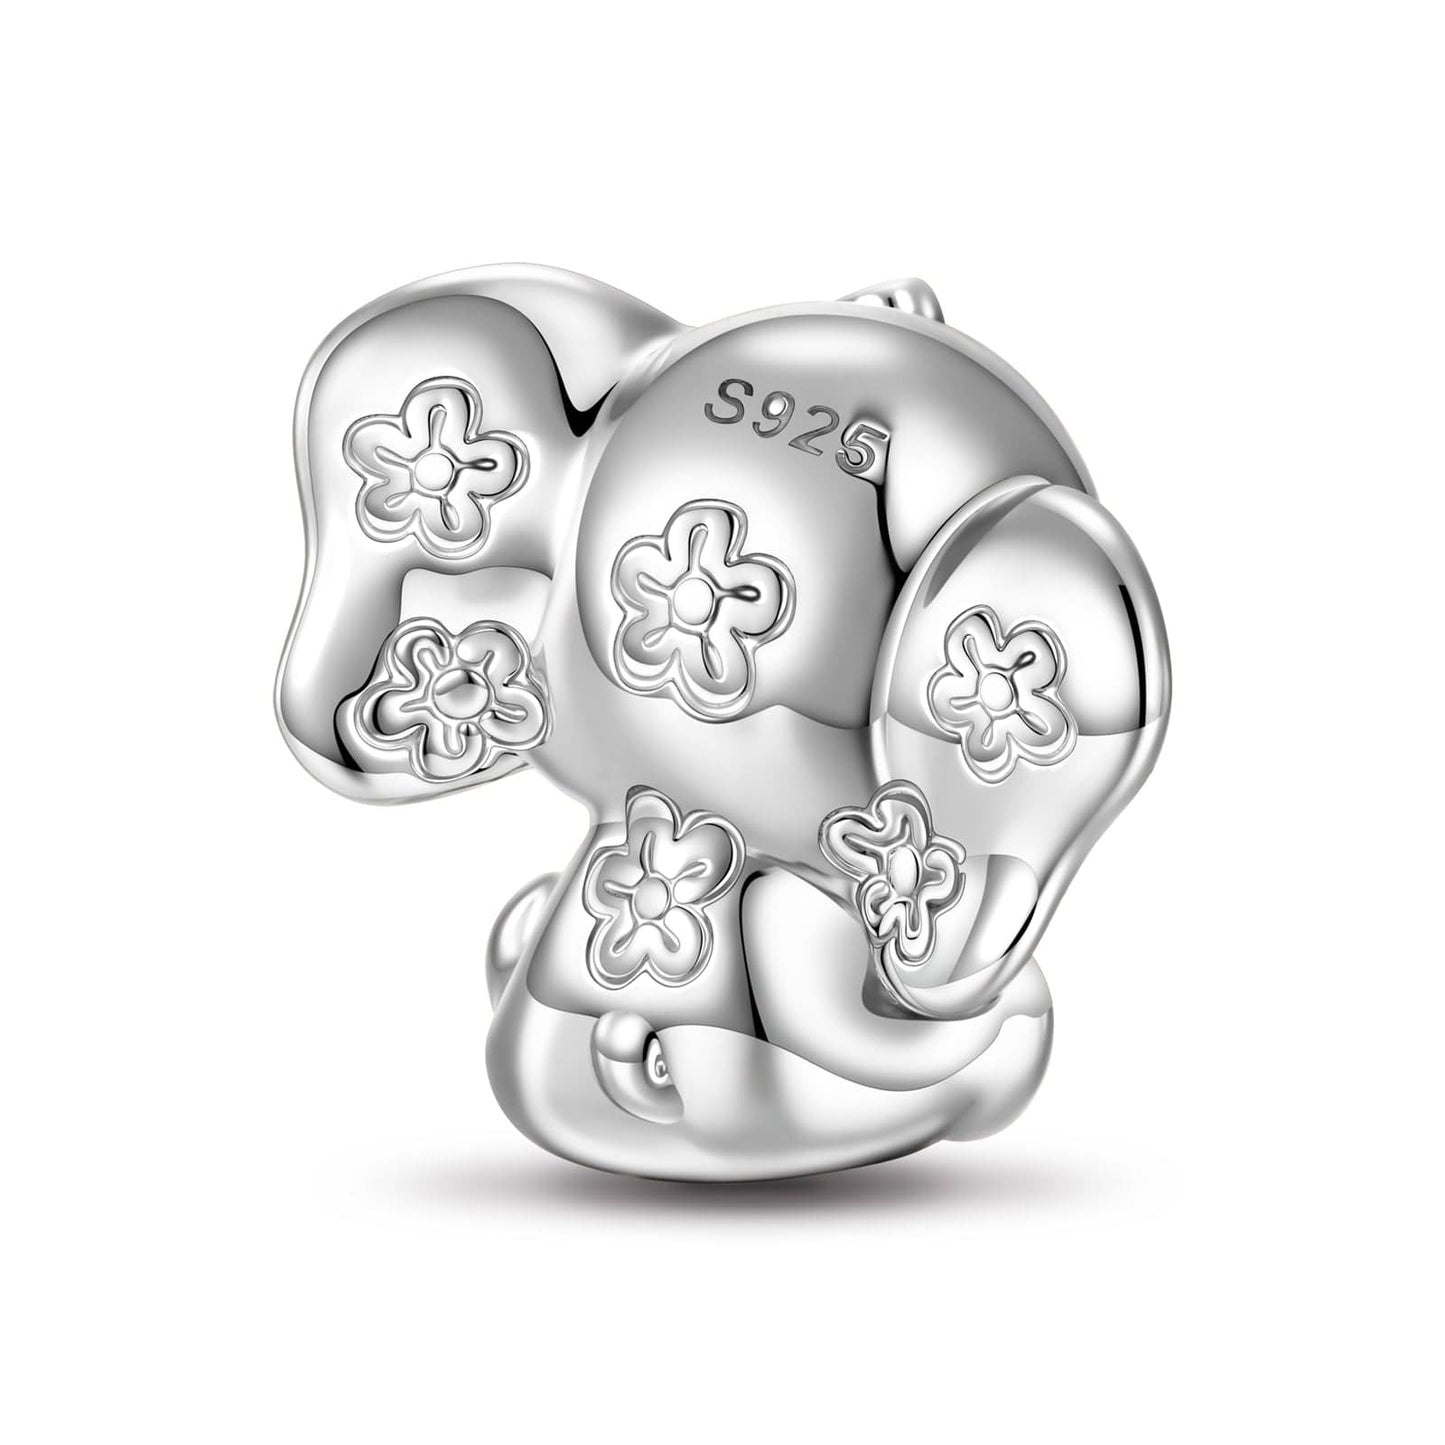 Sterling Silver Baby Elephant Animal Charms With Enamel In White Gold Plated